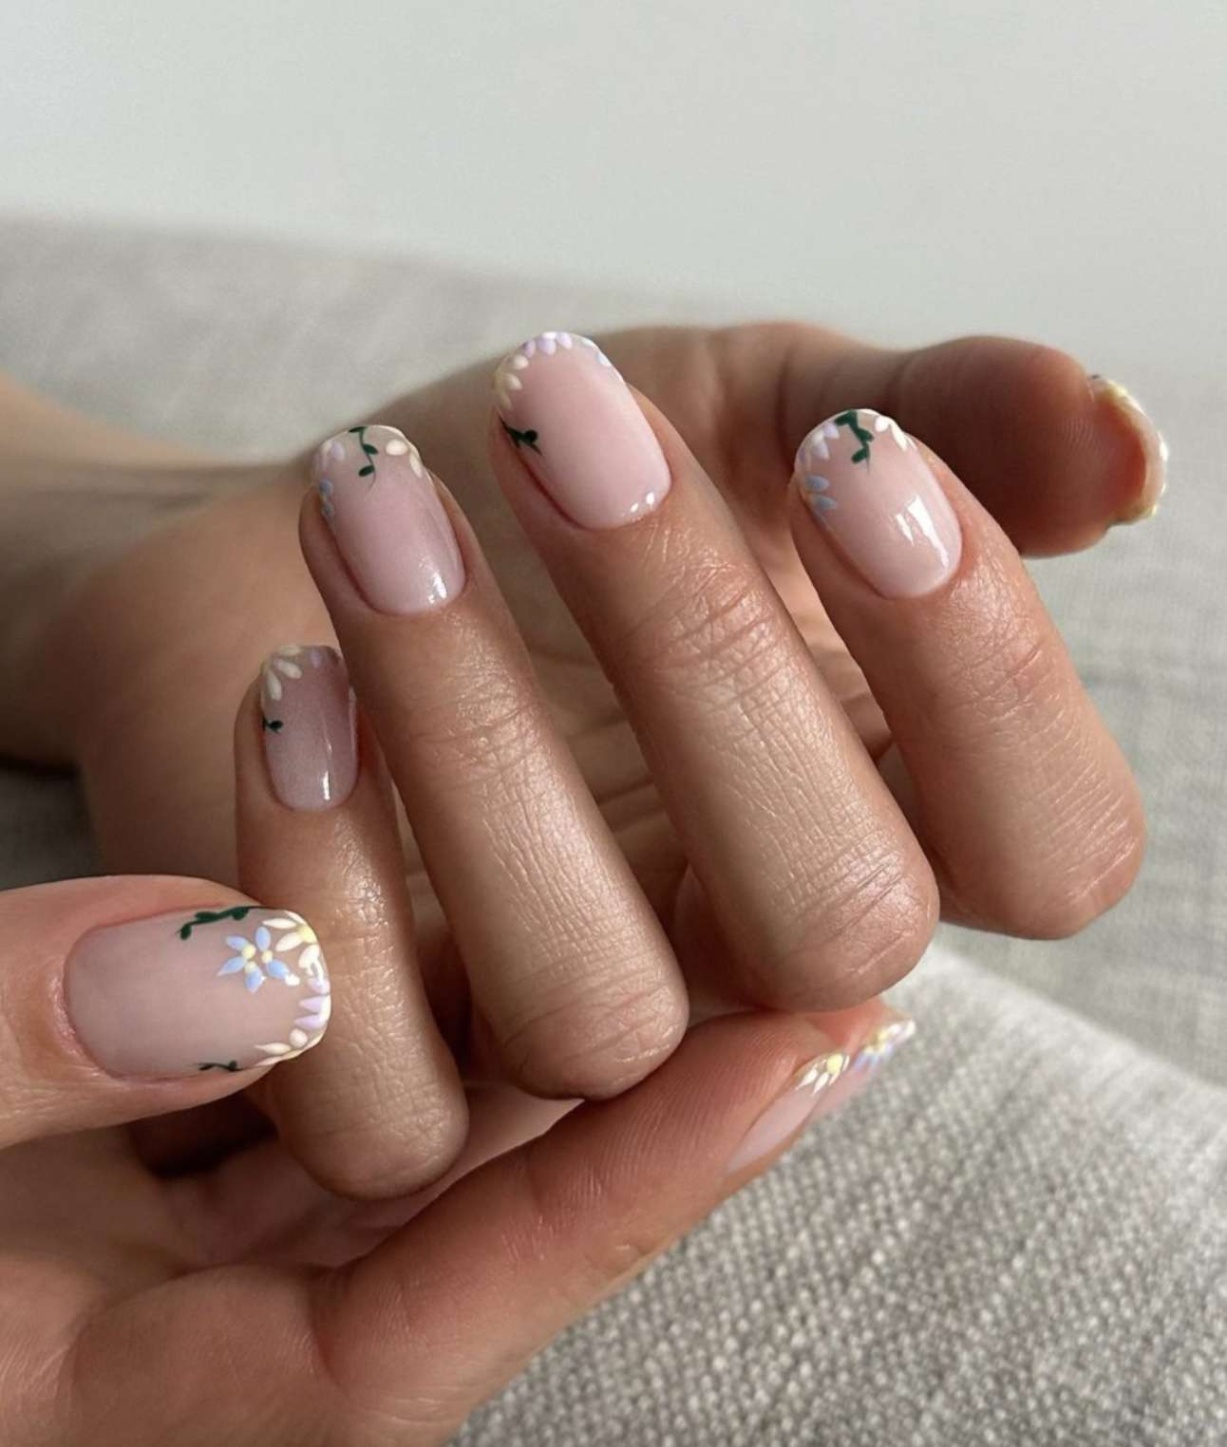 Get Short And Sweet: Unique Natural Nail Designs For A Casual Look